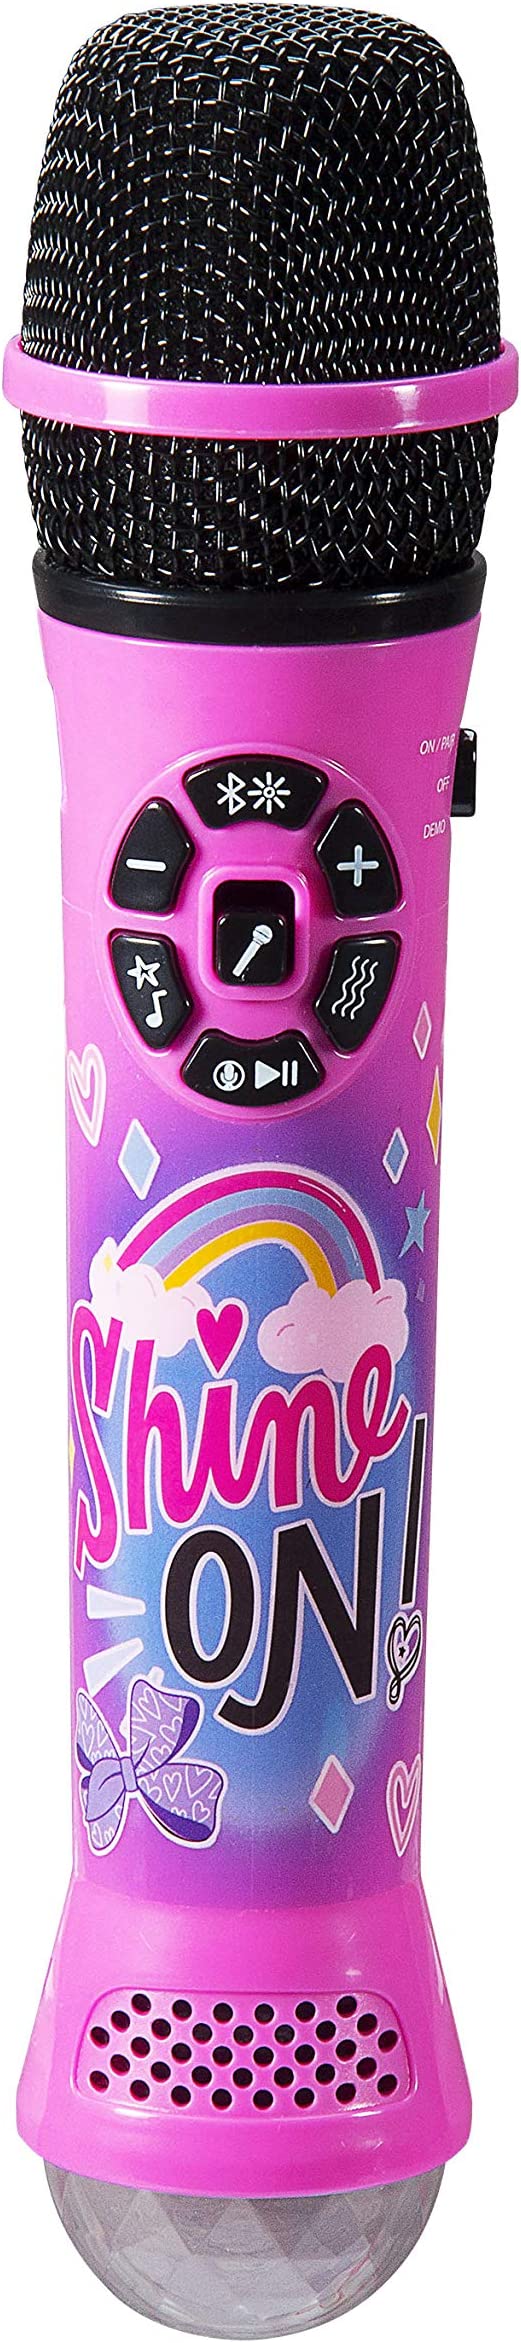 eKids JoJo Siwa Karaoke Microphone for Kids, Bluetooth Microphone and Speaker Connects to MP3 Players, Smartphones, and Tablets